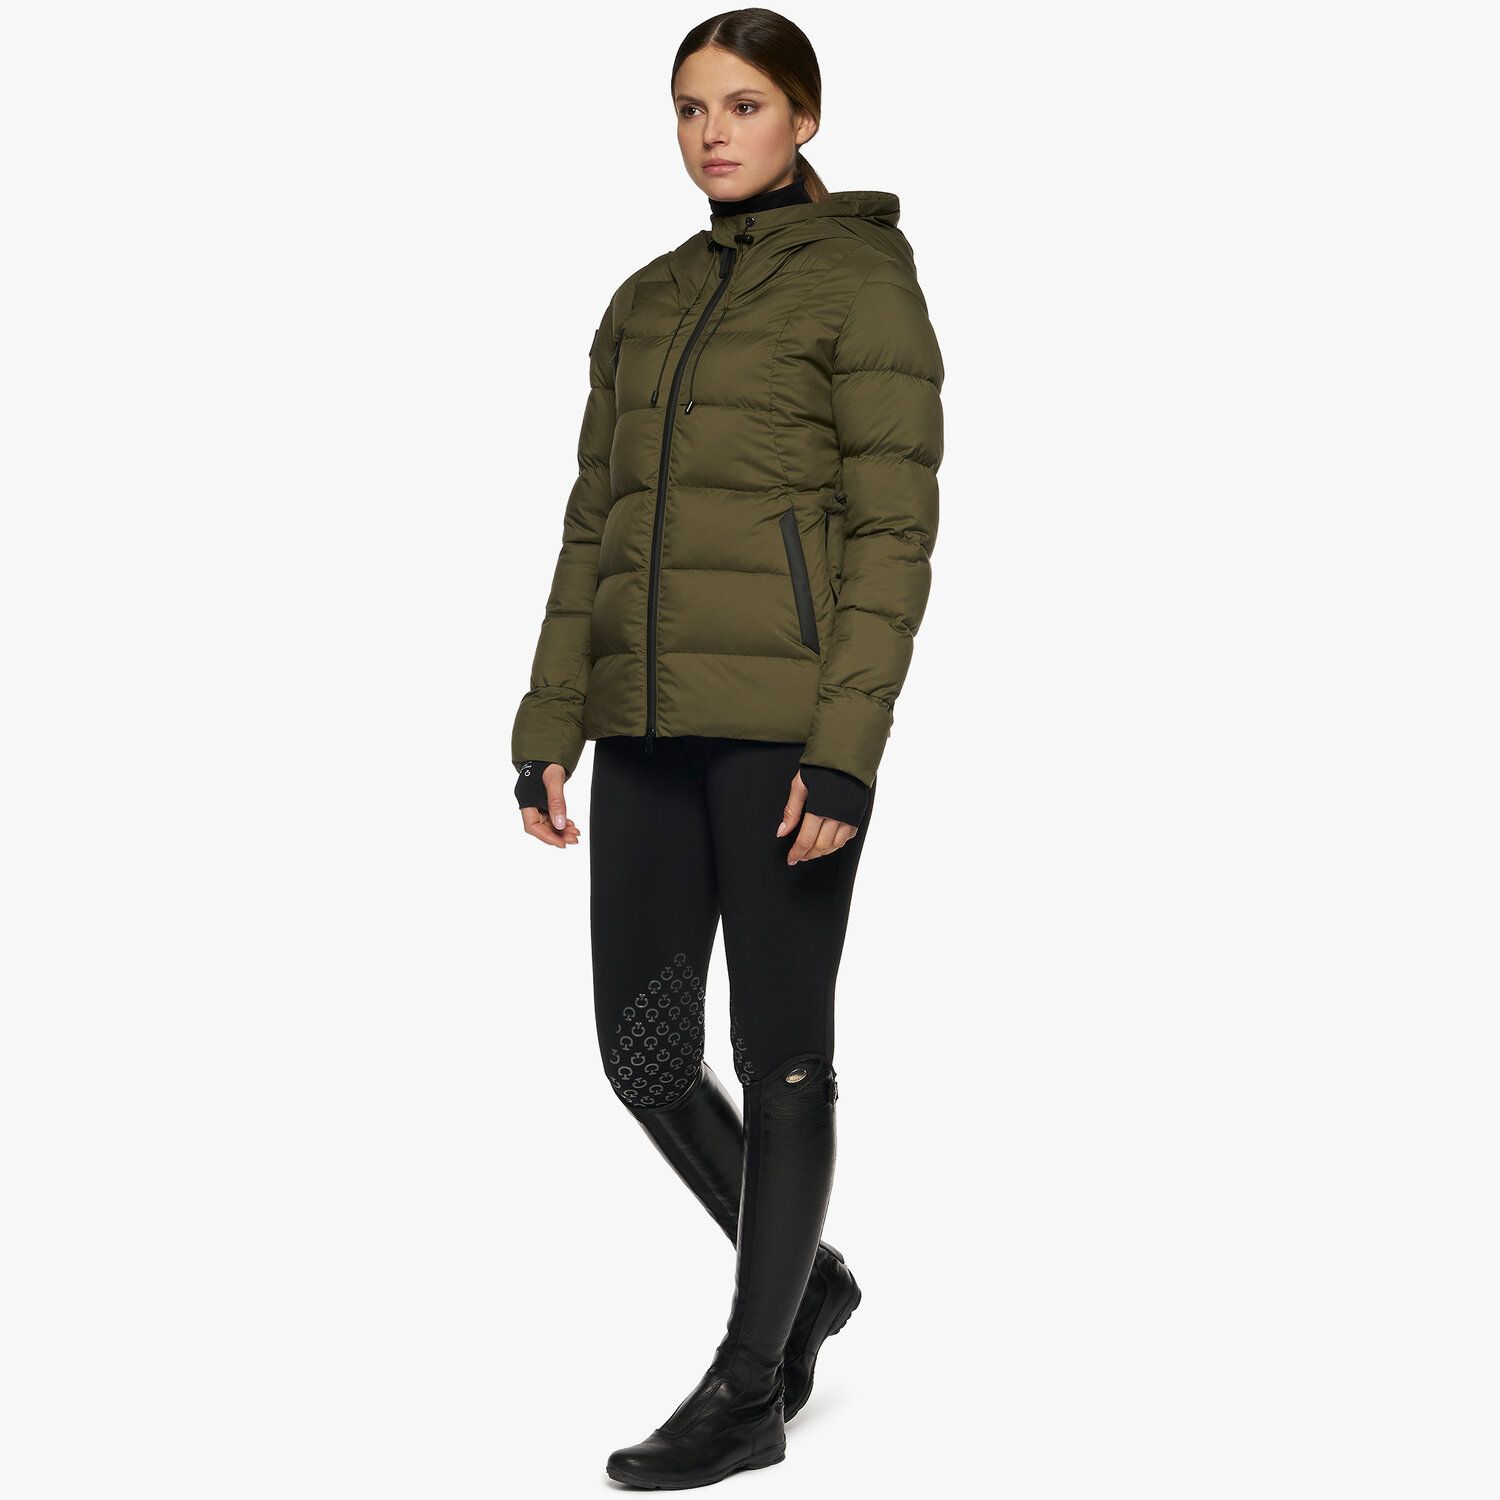 Cavalleria Toscana Women’s quilted nylon puffer jacket FOLIAGE GREEN-4